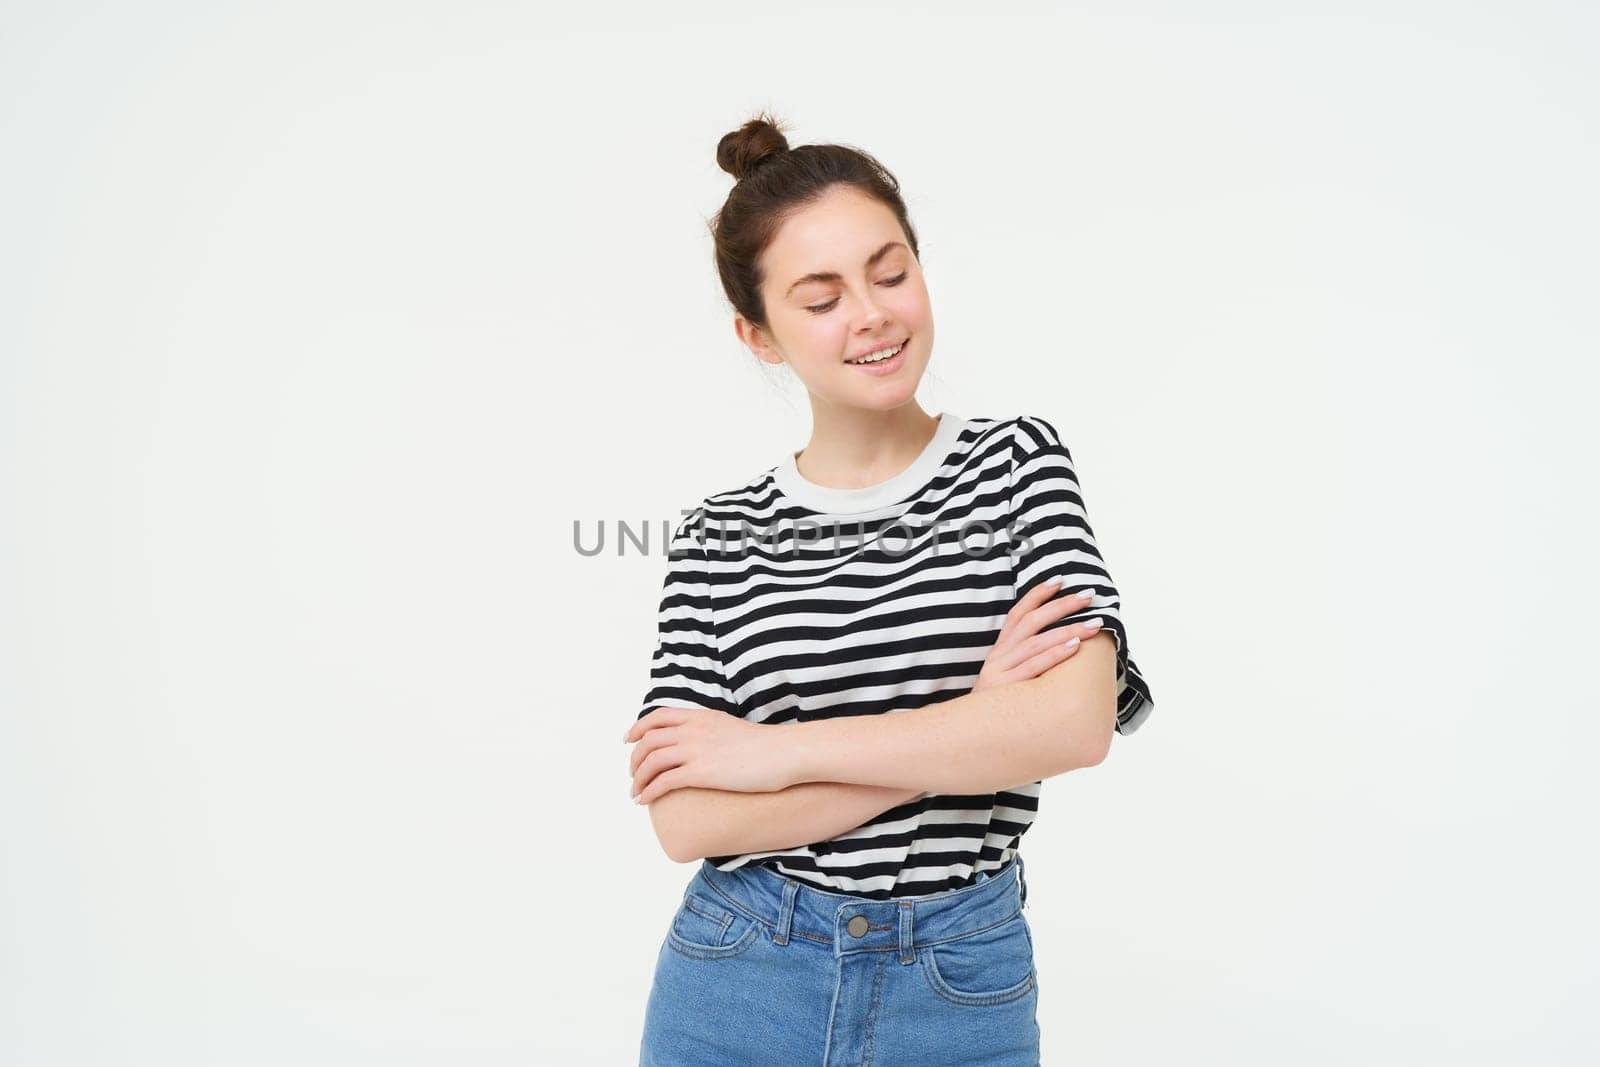 Portrait of attractive, stylish young woman, 25 years old, wearing t-shirt, cross arms against chest and smiling, looking confident, isolated over white background.